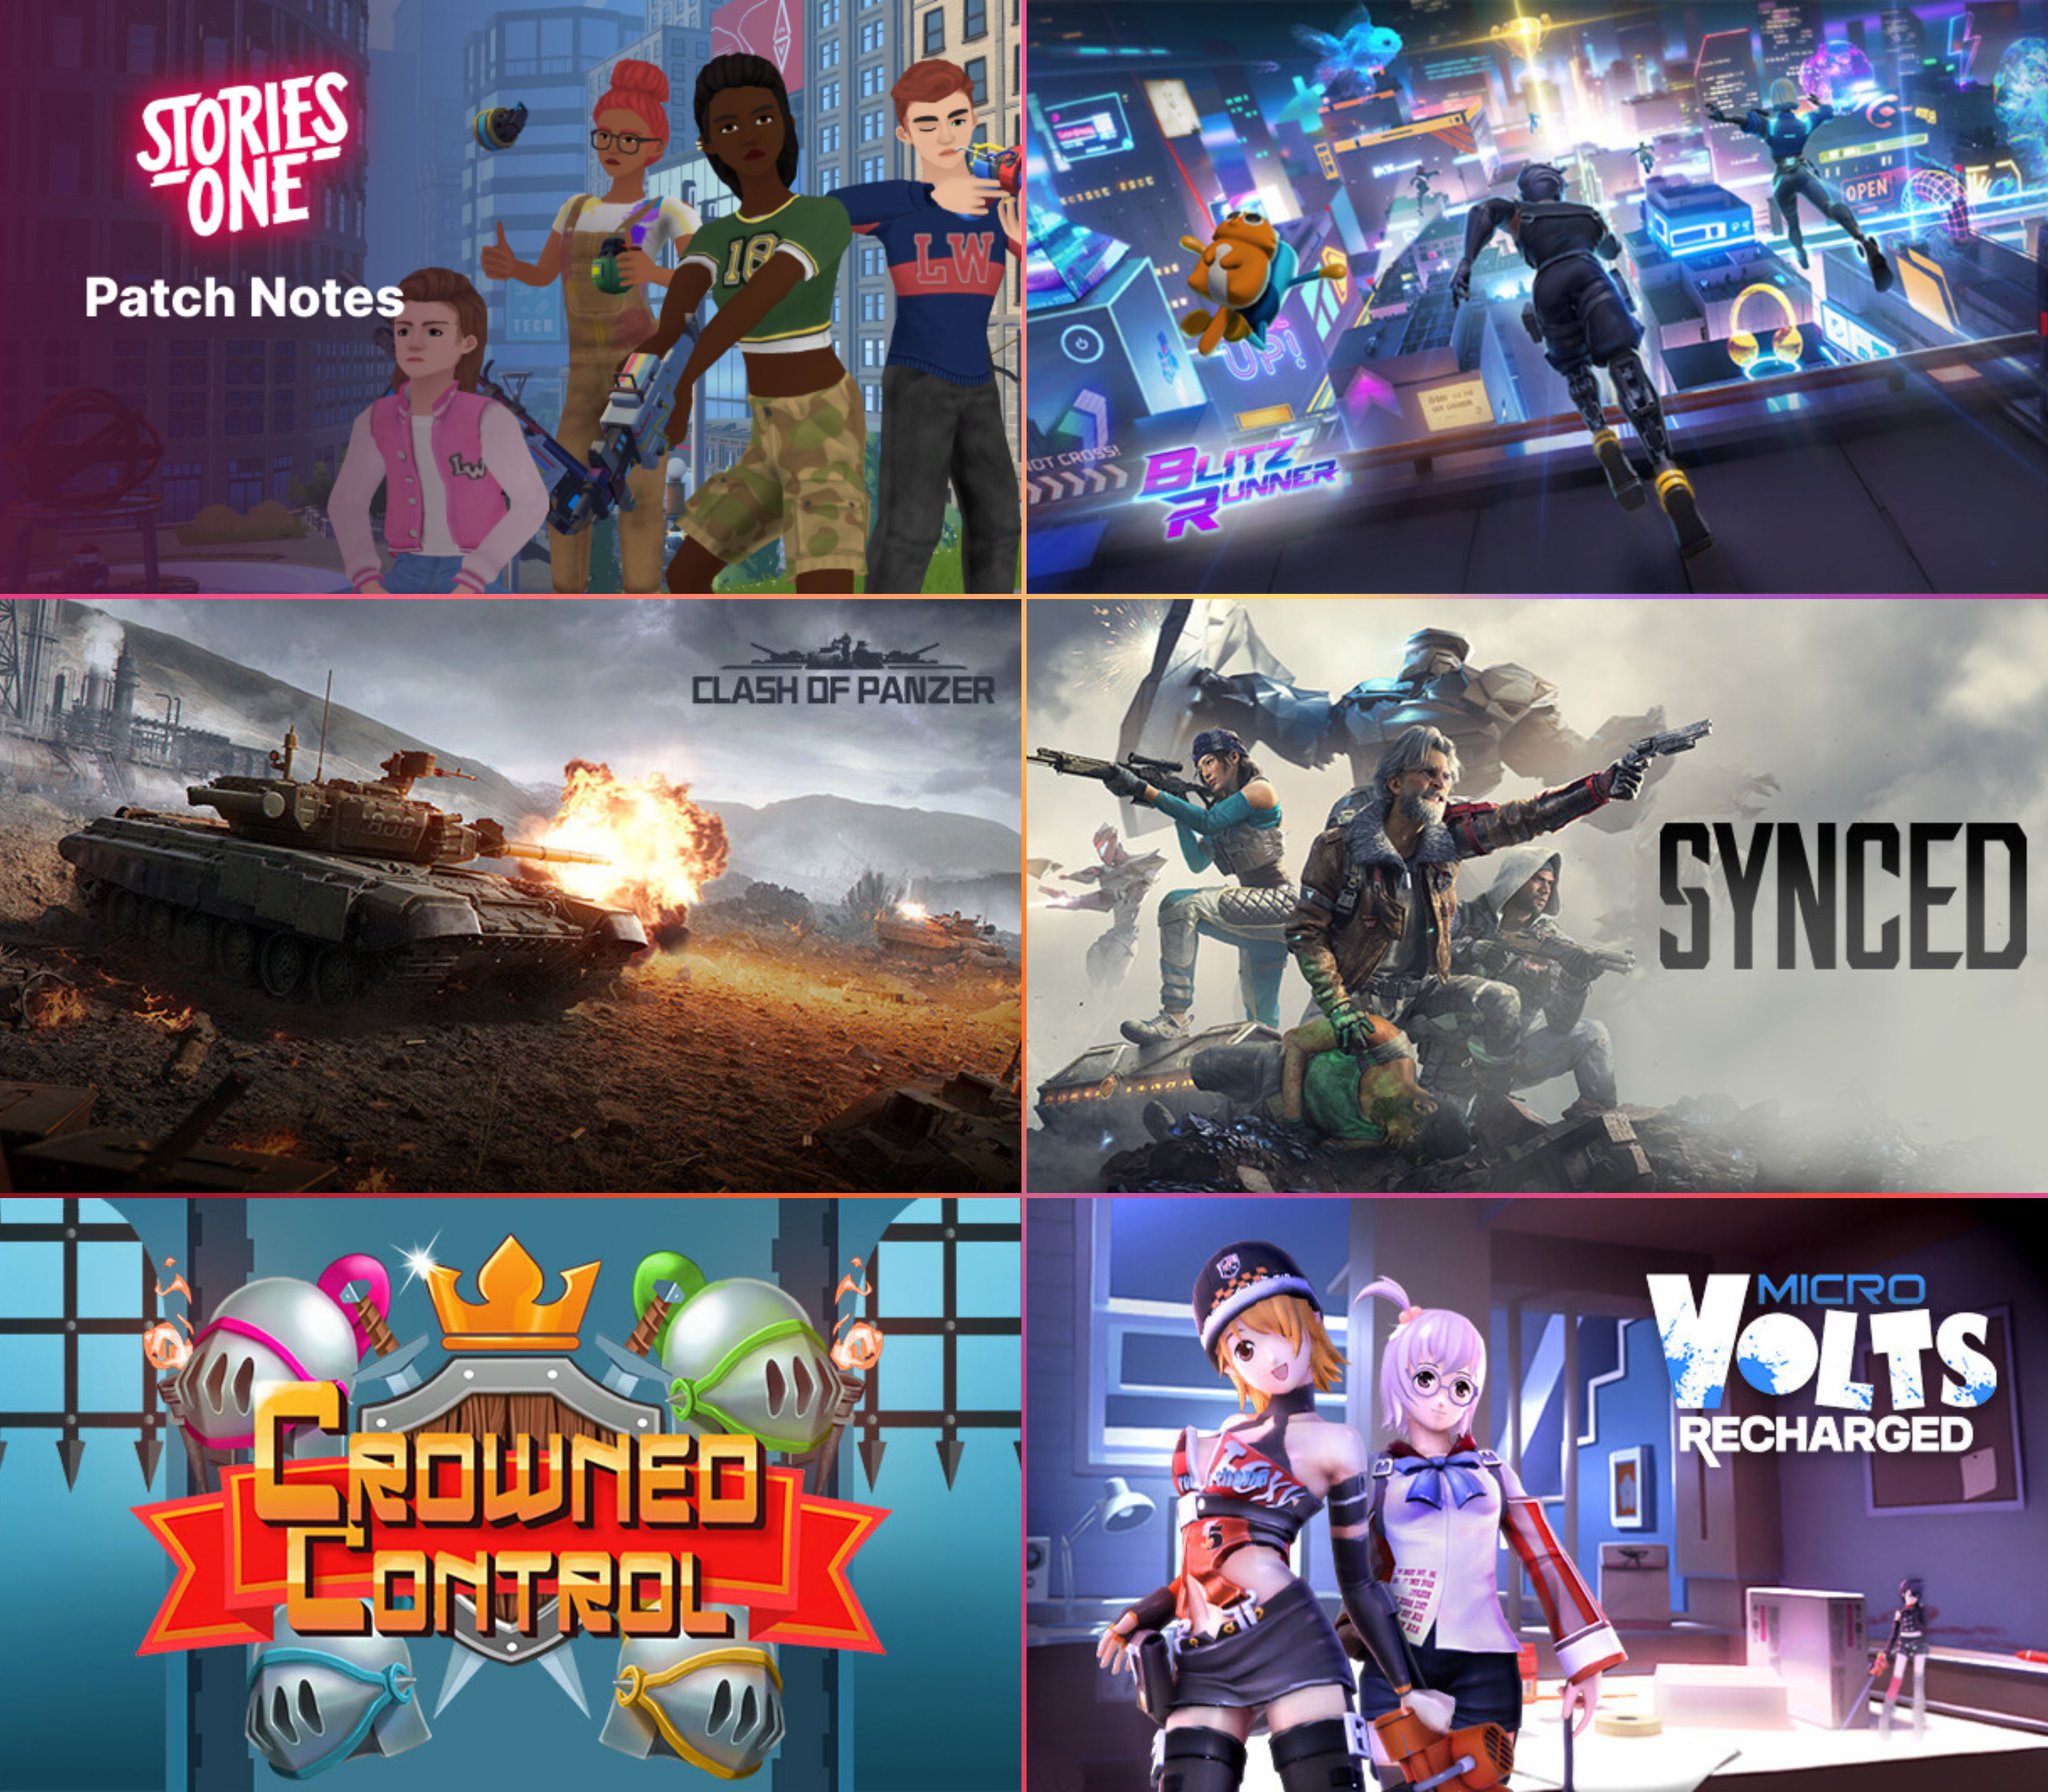 Free Steam Games✨ on X: ⛱️ SEP 16 NEW FREE GAMES ON STEAM ⛱️ 1⃣Stories One   2⃣Blitz Runner  3⃣Clash of  Panzer  4⃣SYNCED  5⃣Crowned  Control